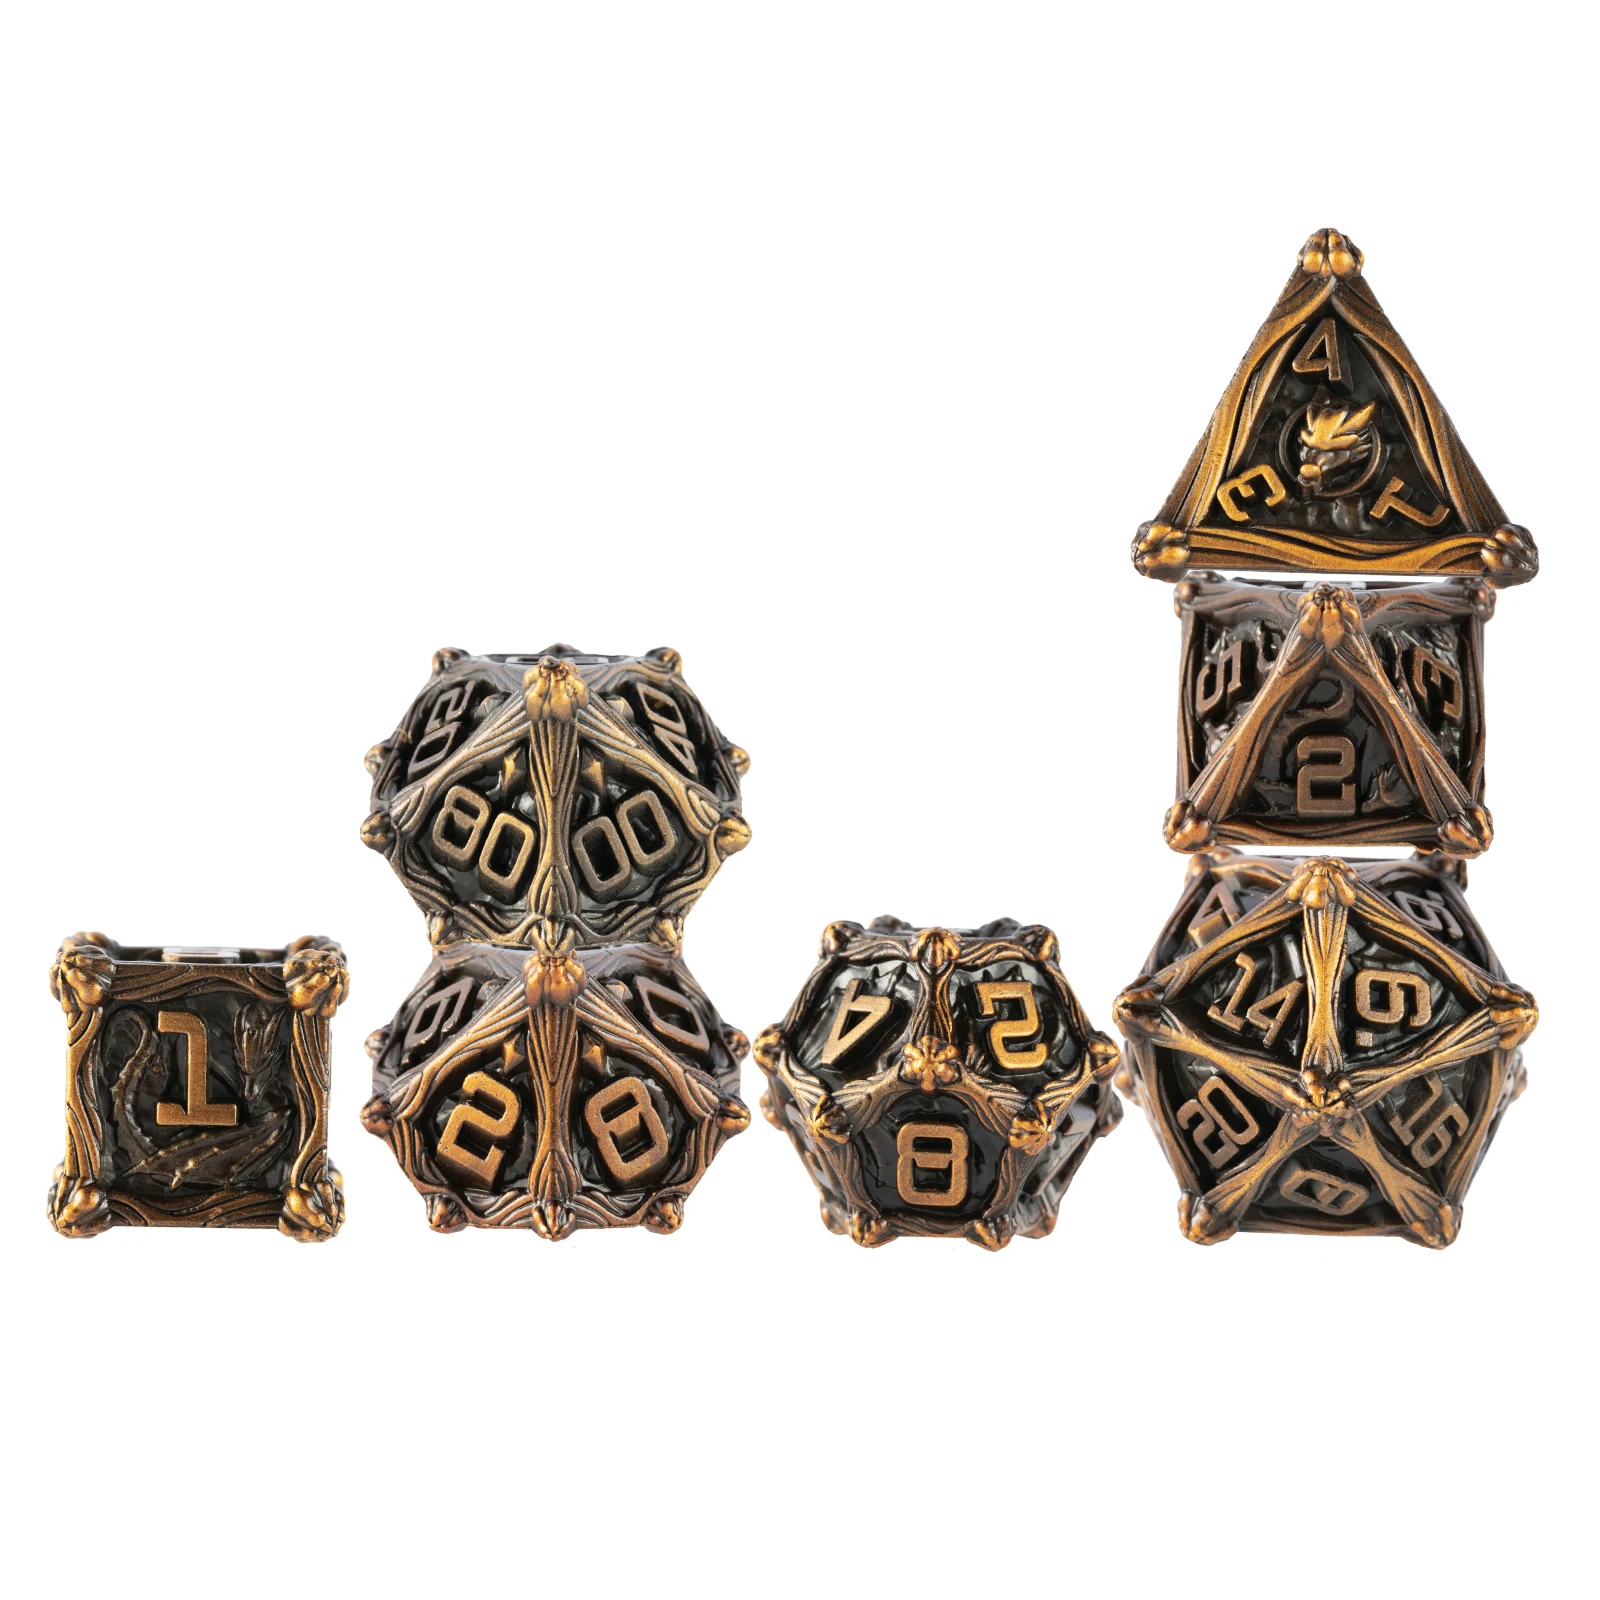 

Board Games Metal DND Dice Set for D&D RPG Dice Dungeons & Dragon Game Metal Polyhedral Dice Set D4 D6 D10 D20 Table Games